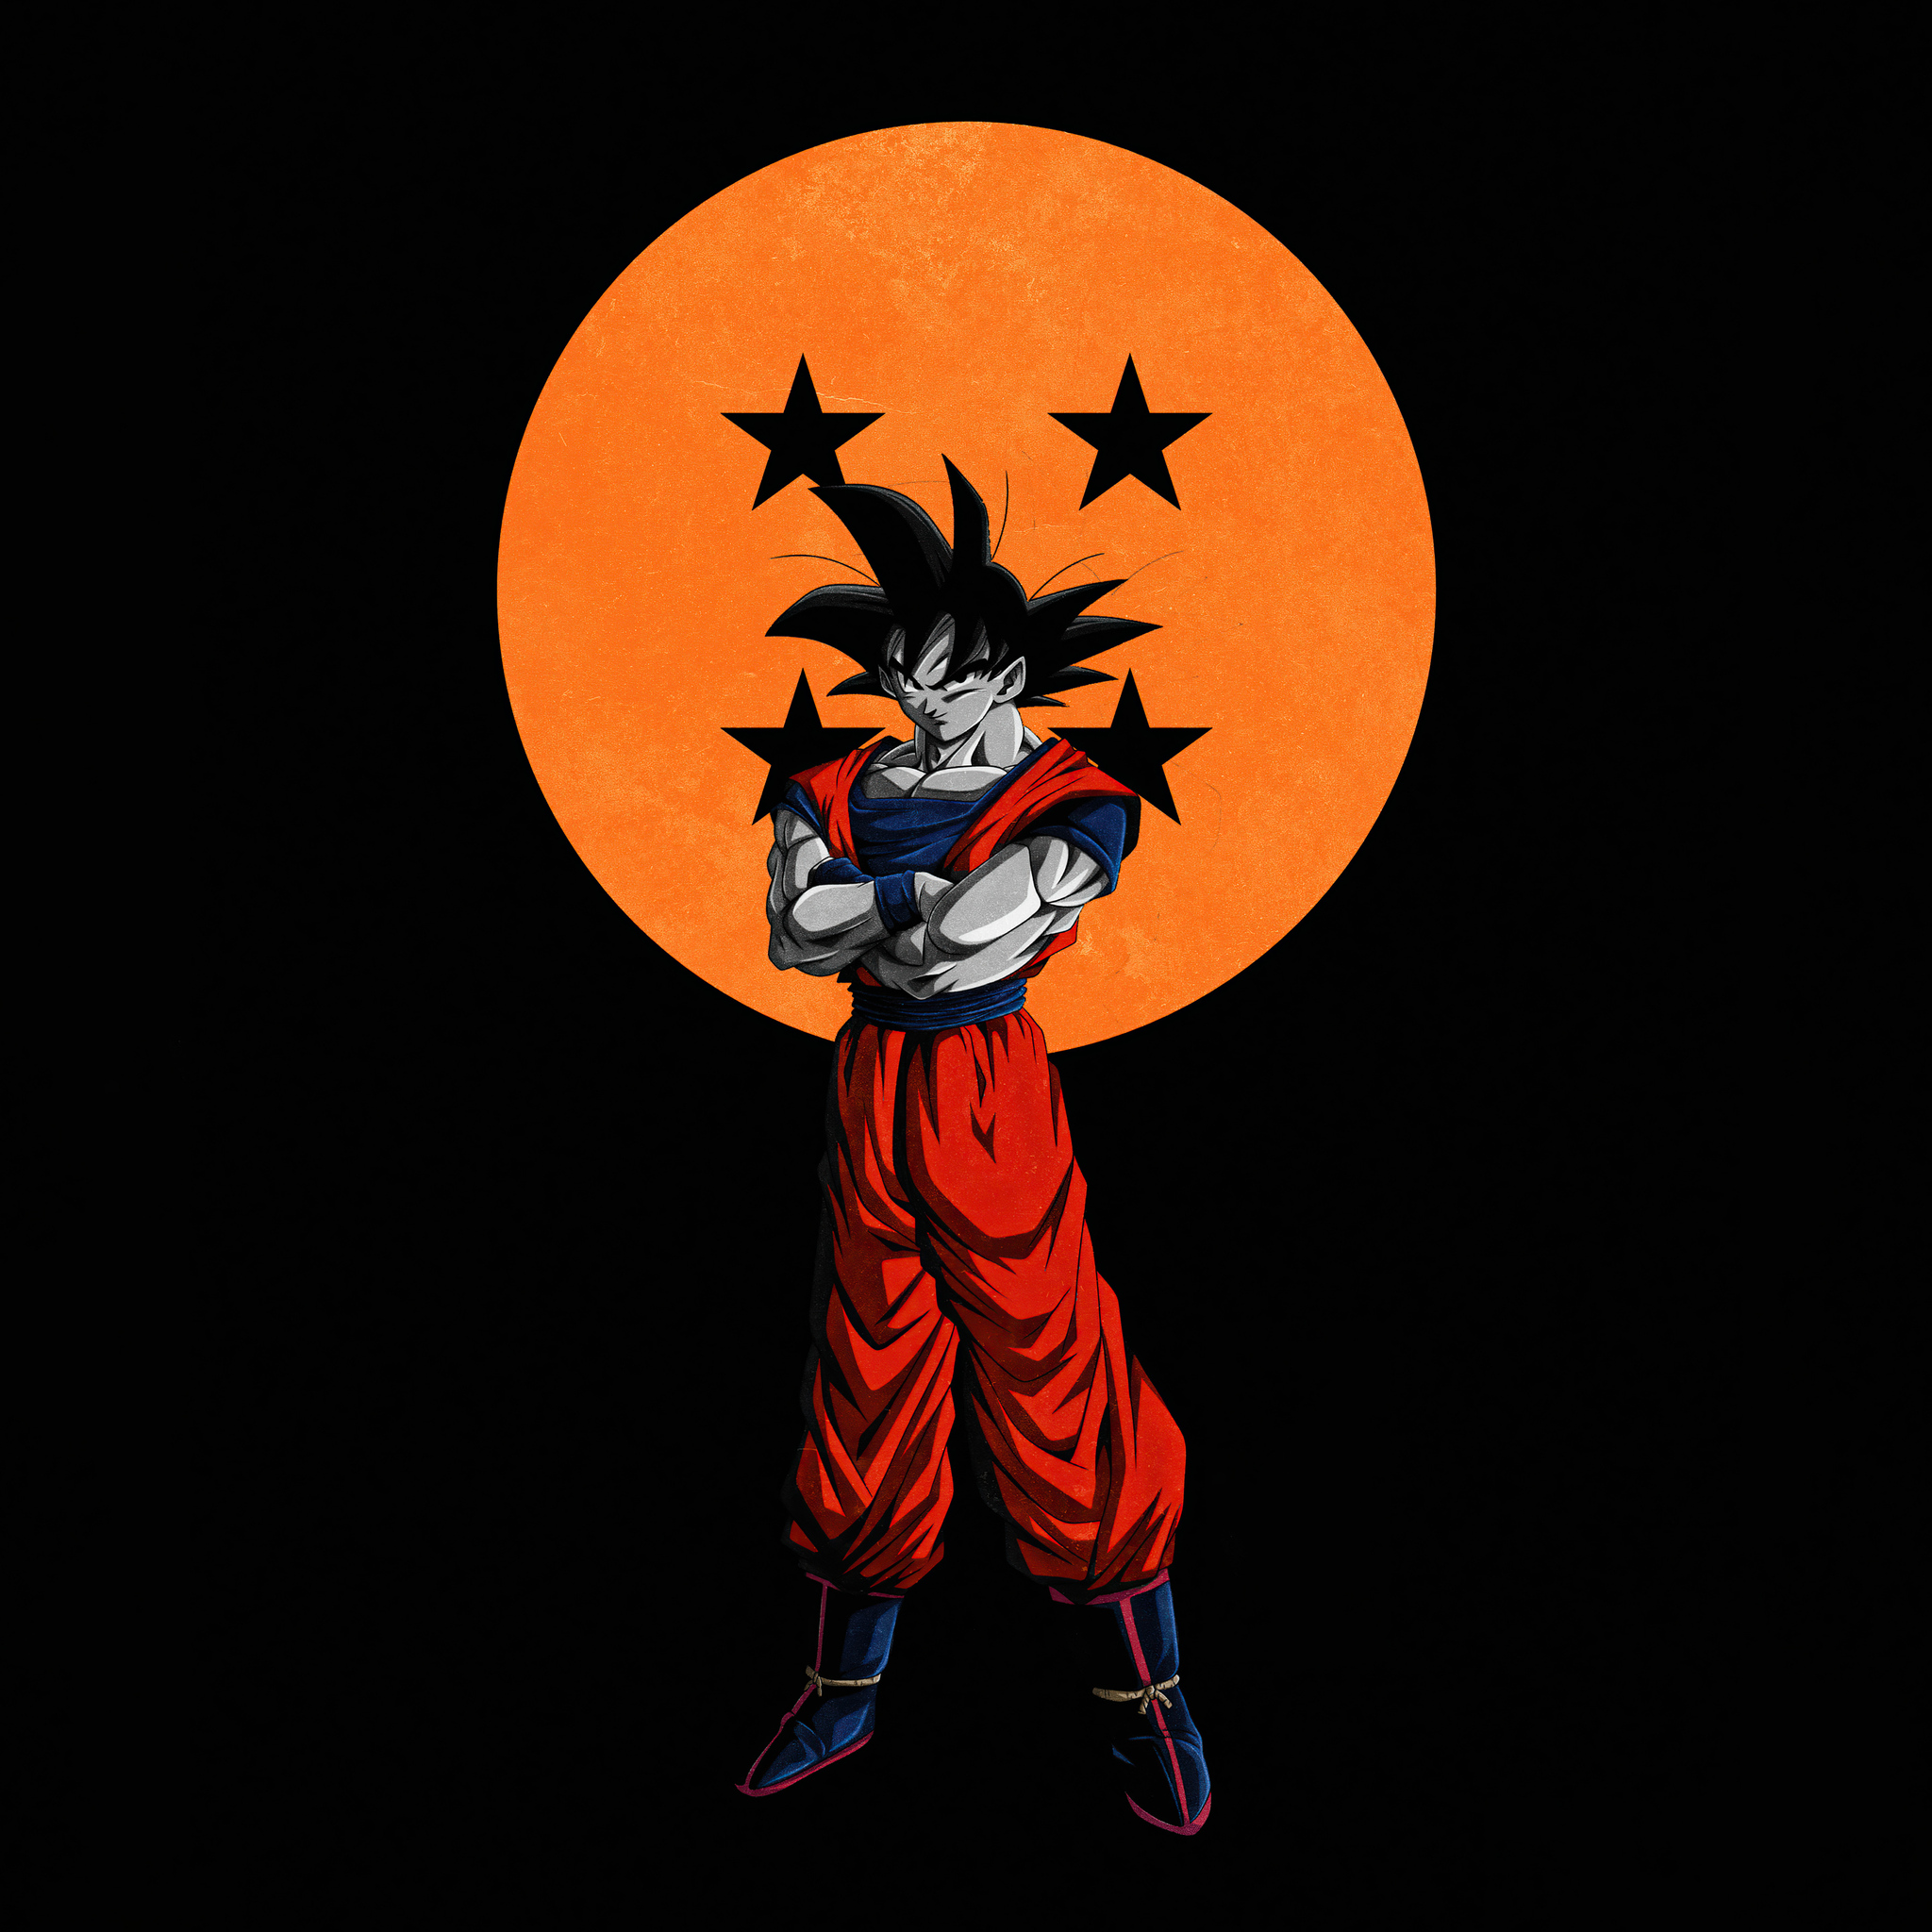 X goku dragon ball dark k ipad air hd k wallpapers images backgrounds photos and pictures